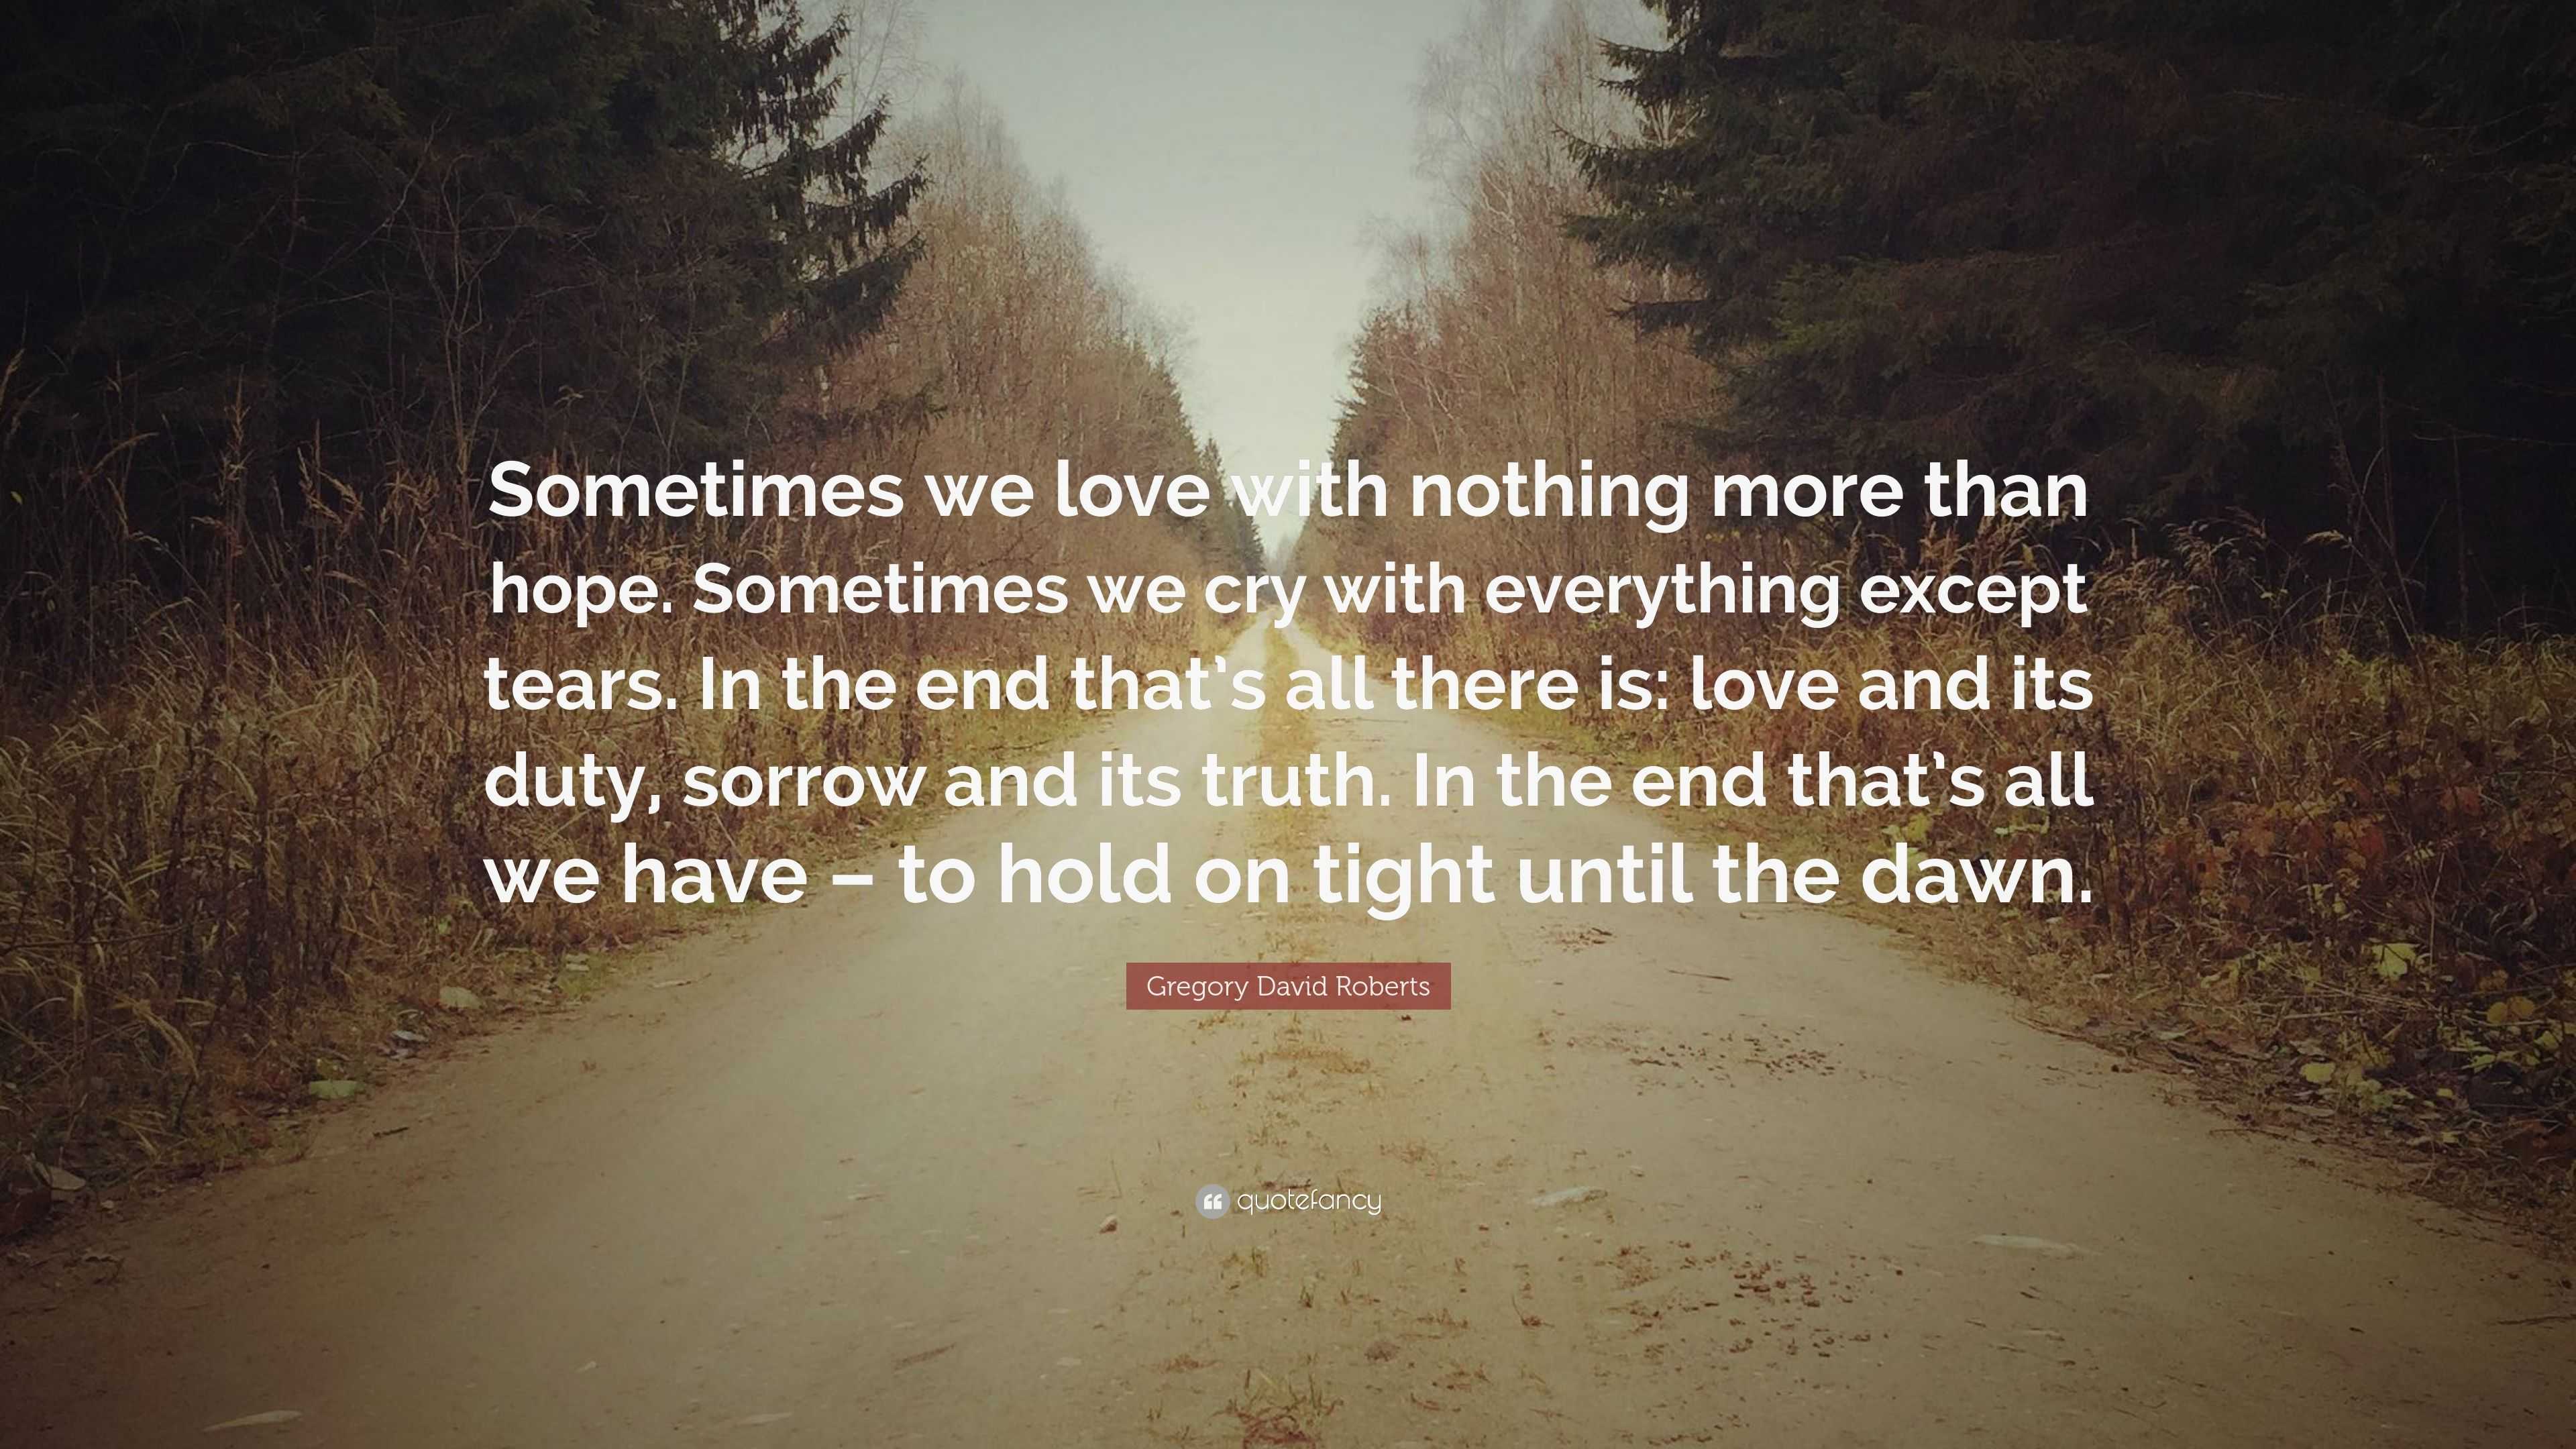 Gregory David Roberts Quote: “Sometimes we love with nothing more than ...